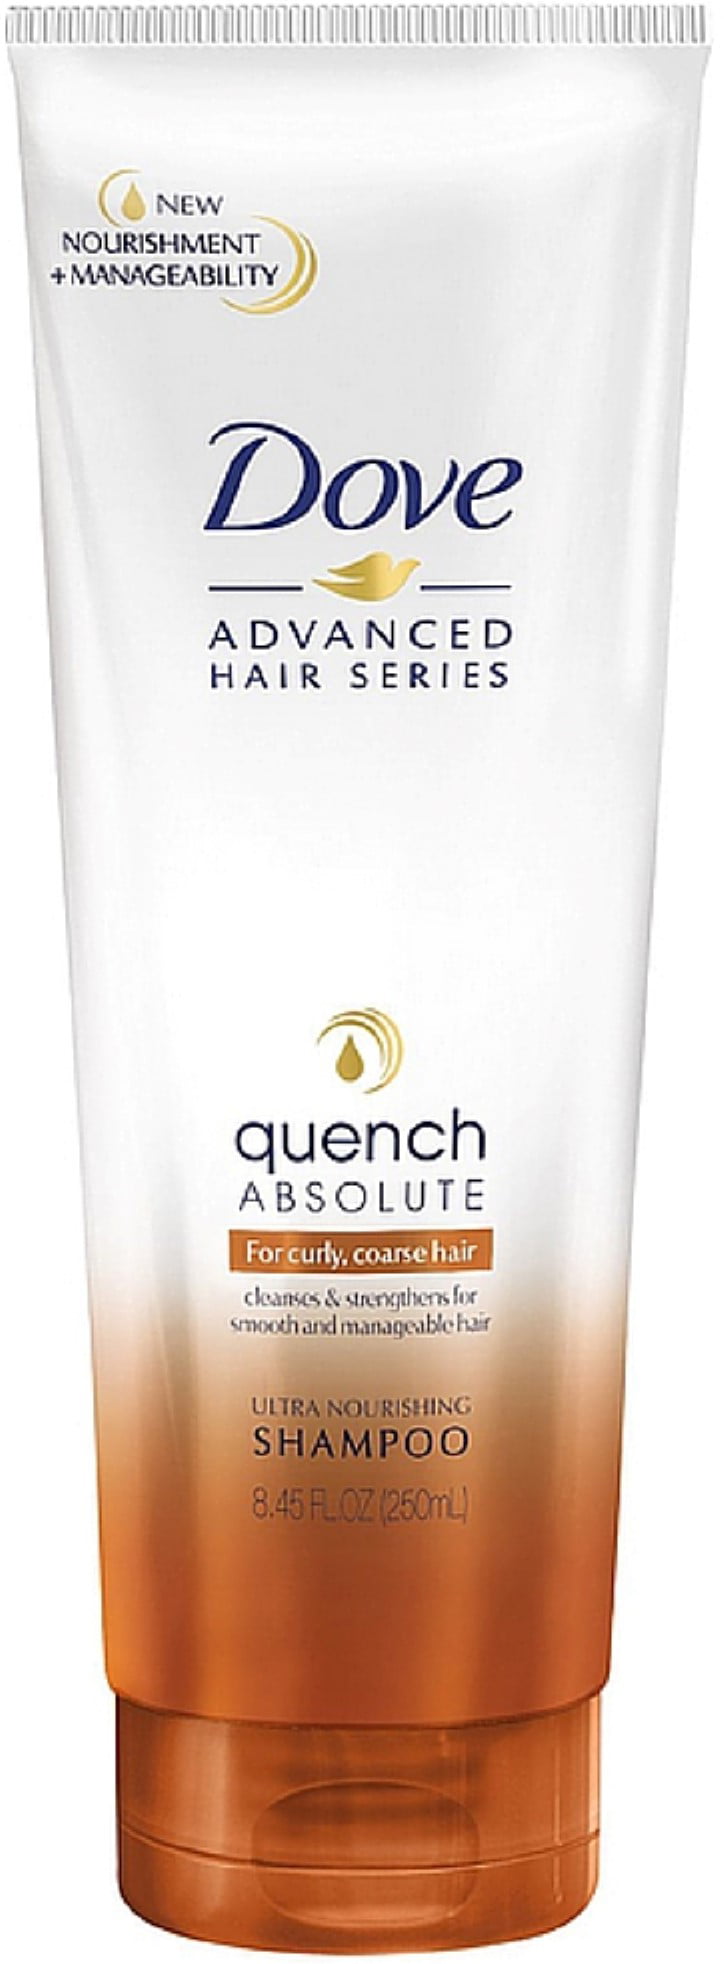 reagere magasin Kanon Dove Advanced Hair Series Ultra Nourishing Shampoo, Quench Absolute 8.45 oz  (Pack of 6) - Walmart.com